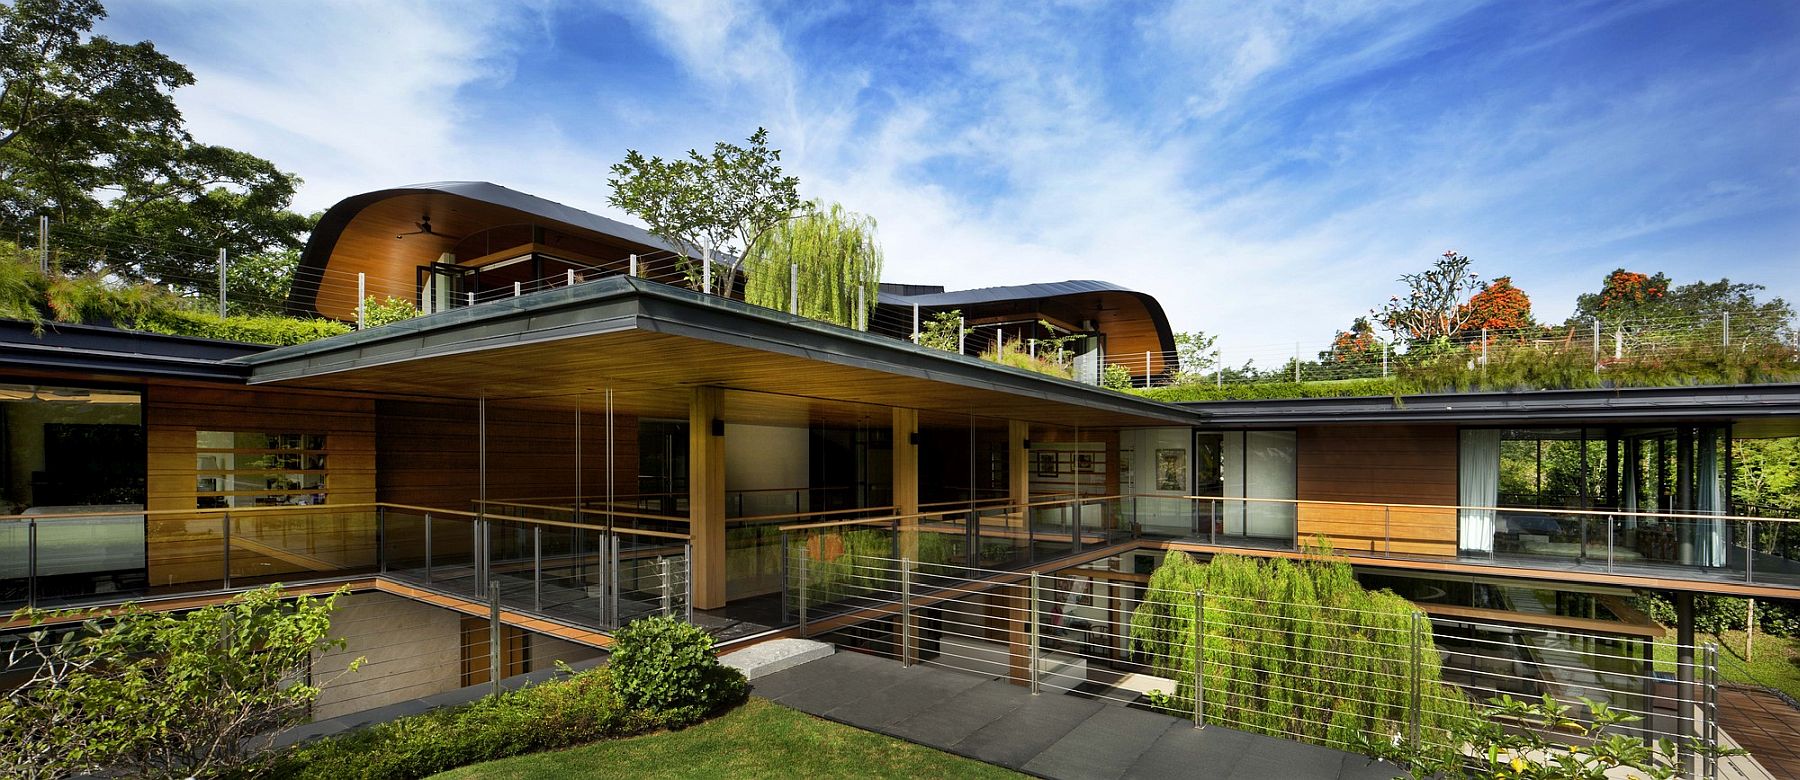 L-shaped-home-with-walkways-and-greenery-all-around